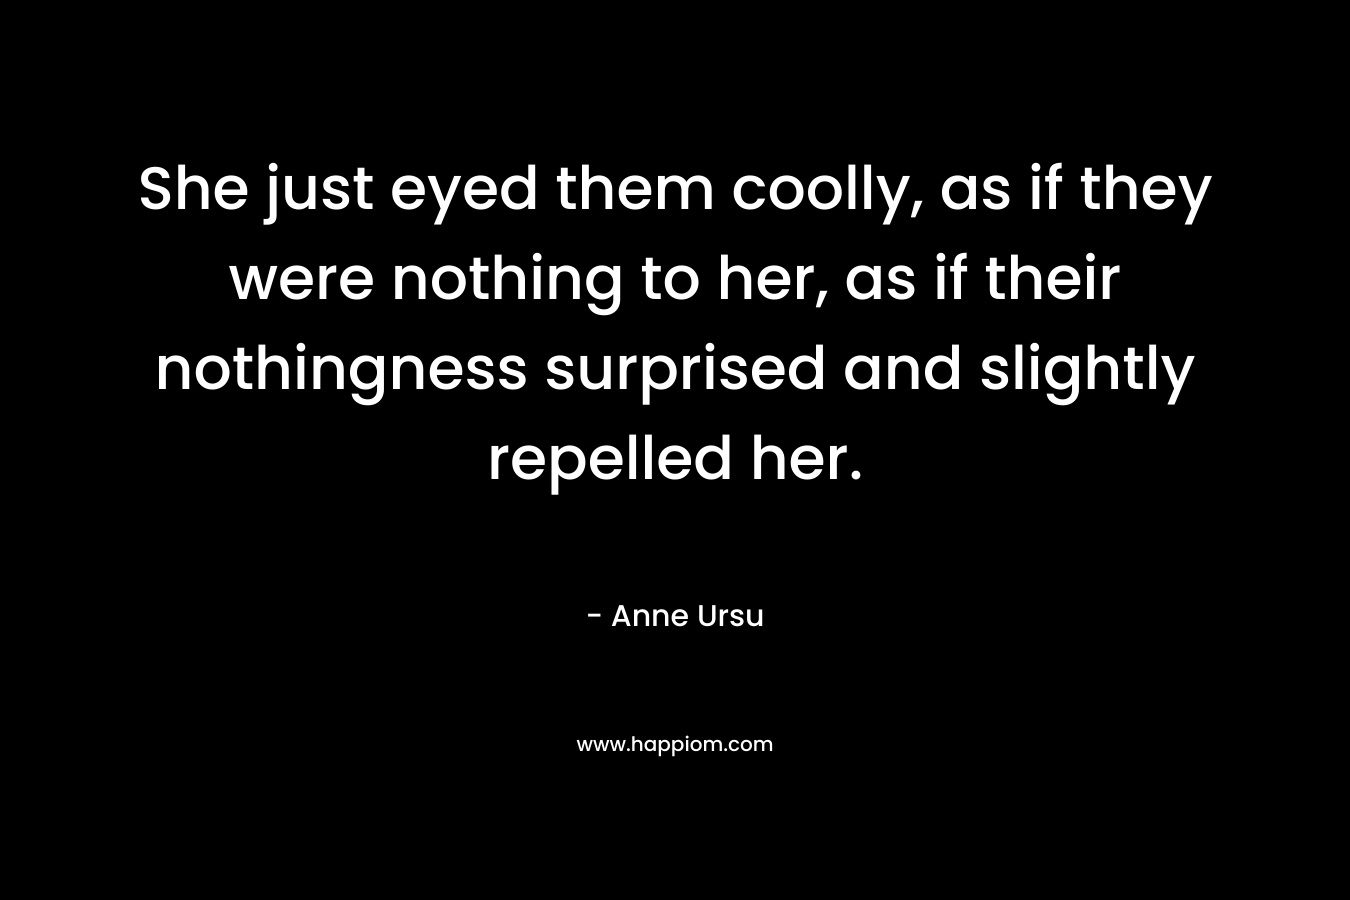 She just eyed them coolly, as if they were nothing to her, as if their nothingness surprised and slightly repelled her. – Anne Ursu